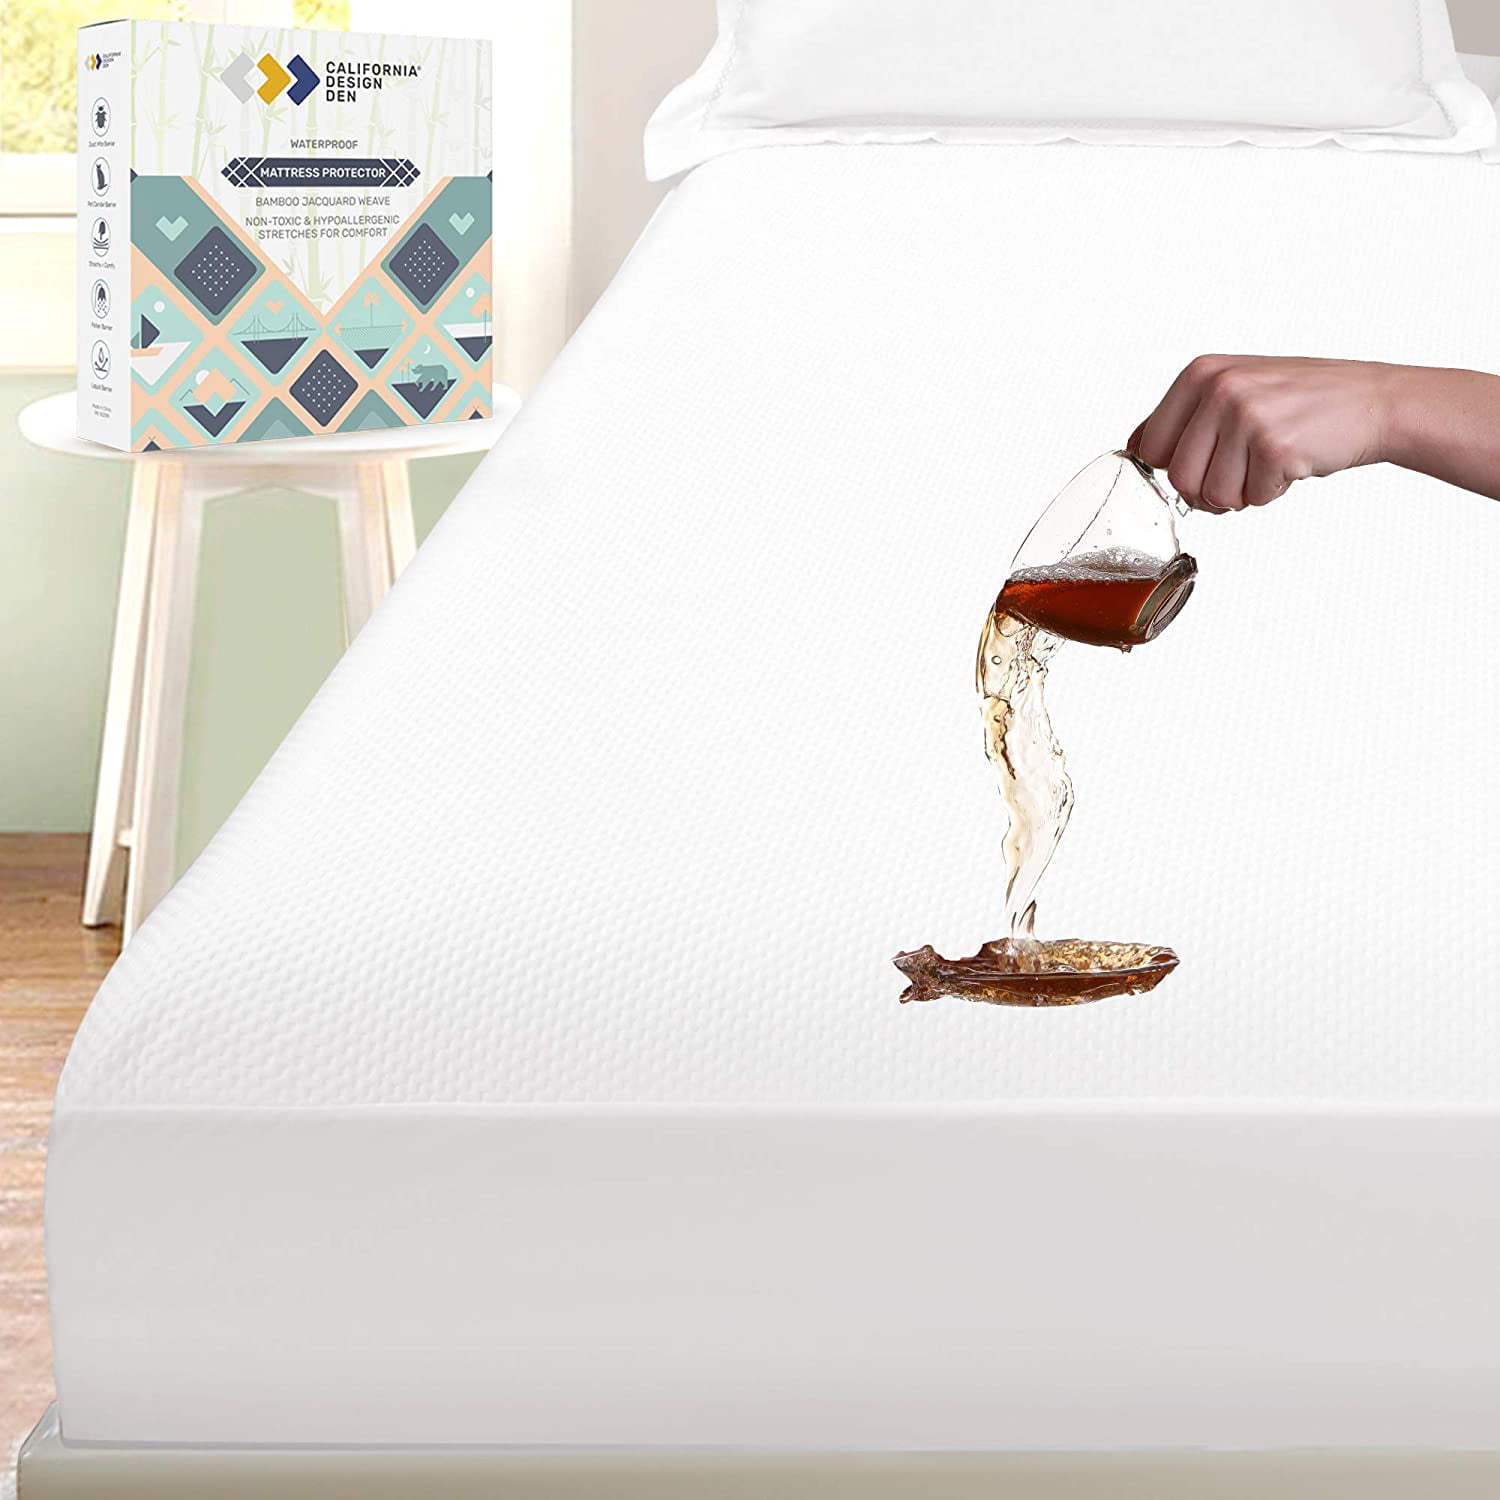 Heavy Duty 100% Guaranteed Waterproof Vinyl Mattress Protector Fitted Bed Cover.